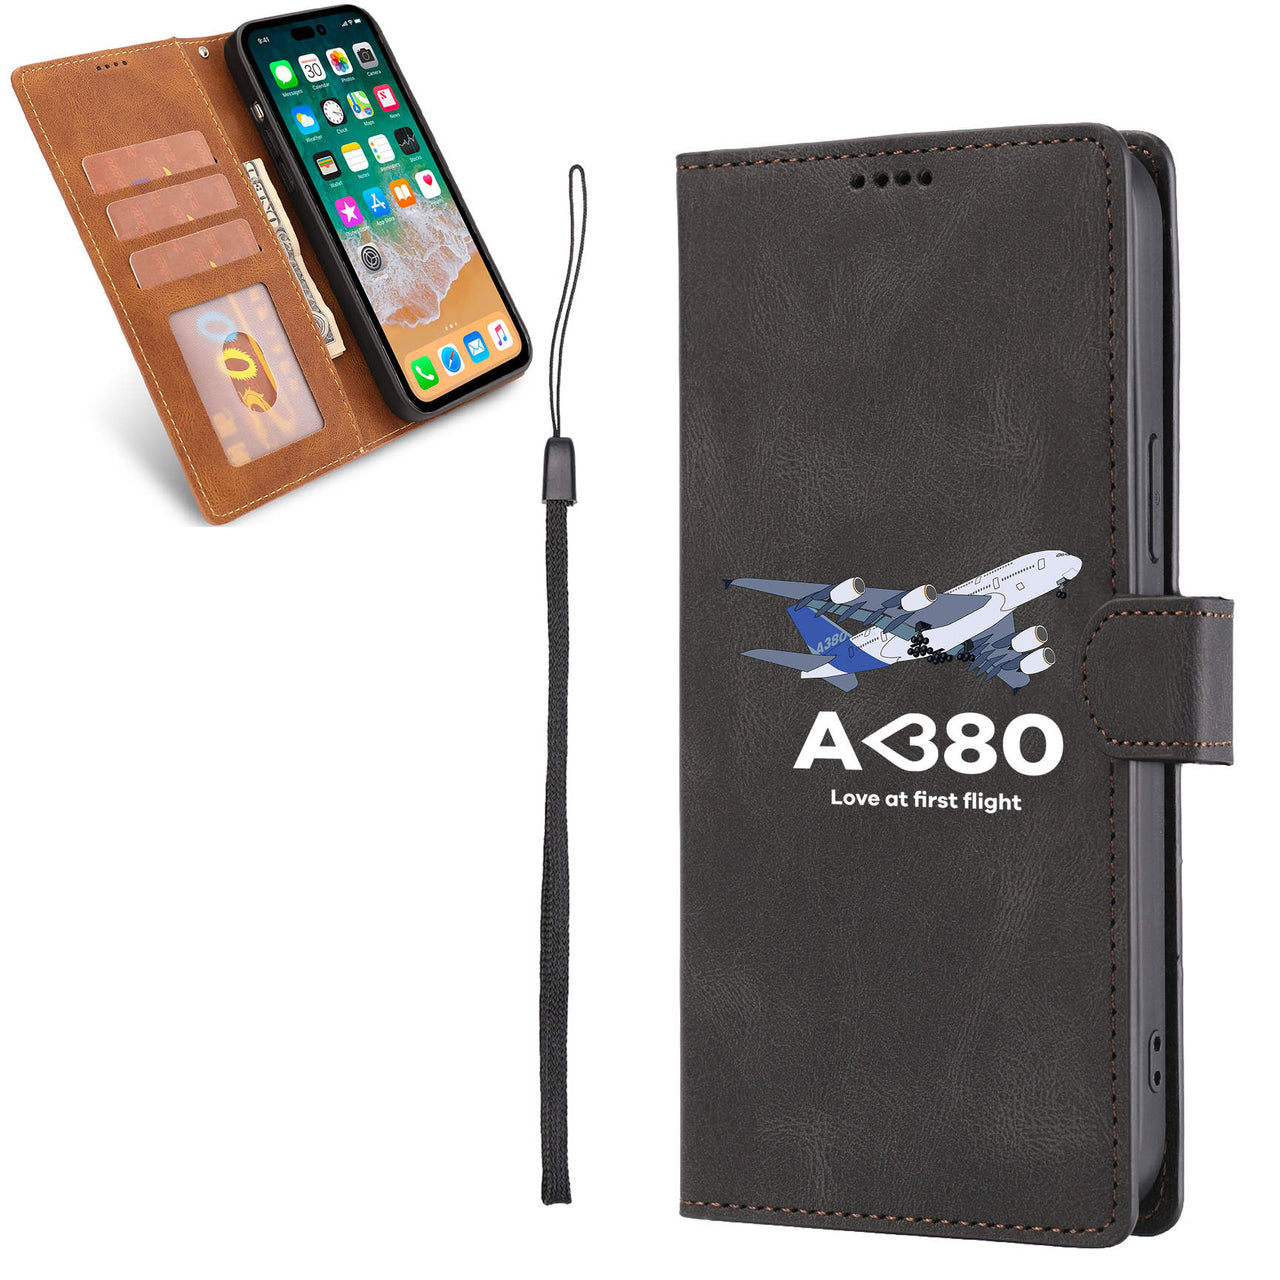 Airbus A380 Love at first flight Designed Leather iPhone Cases